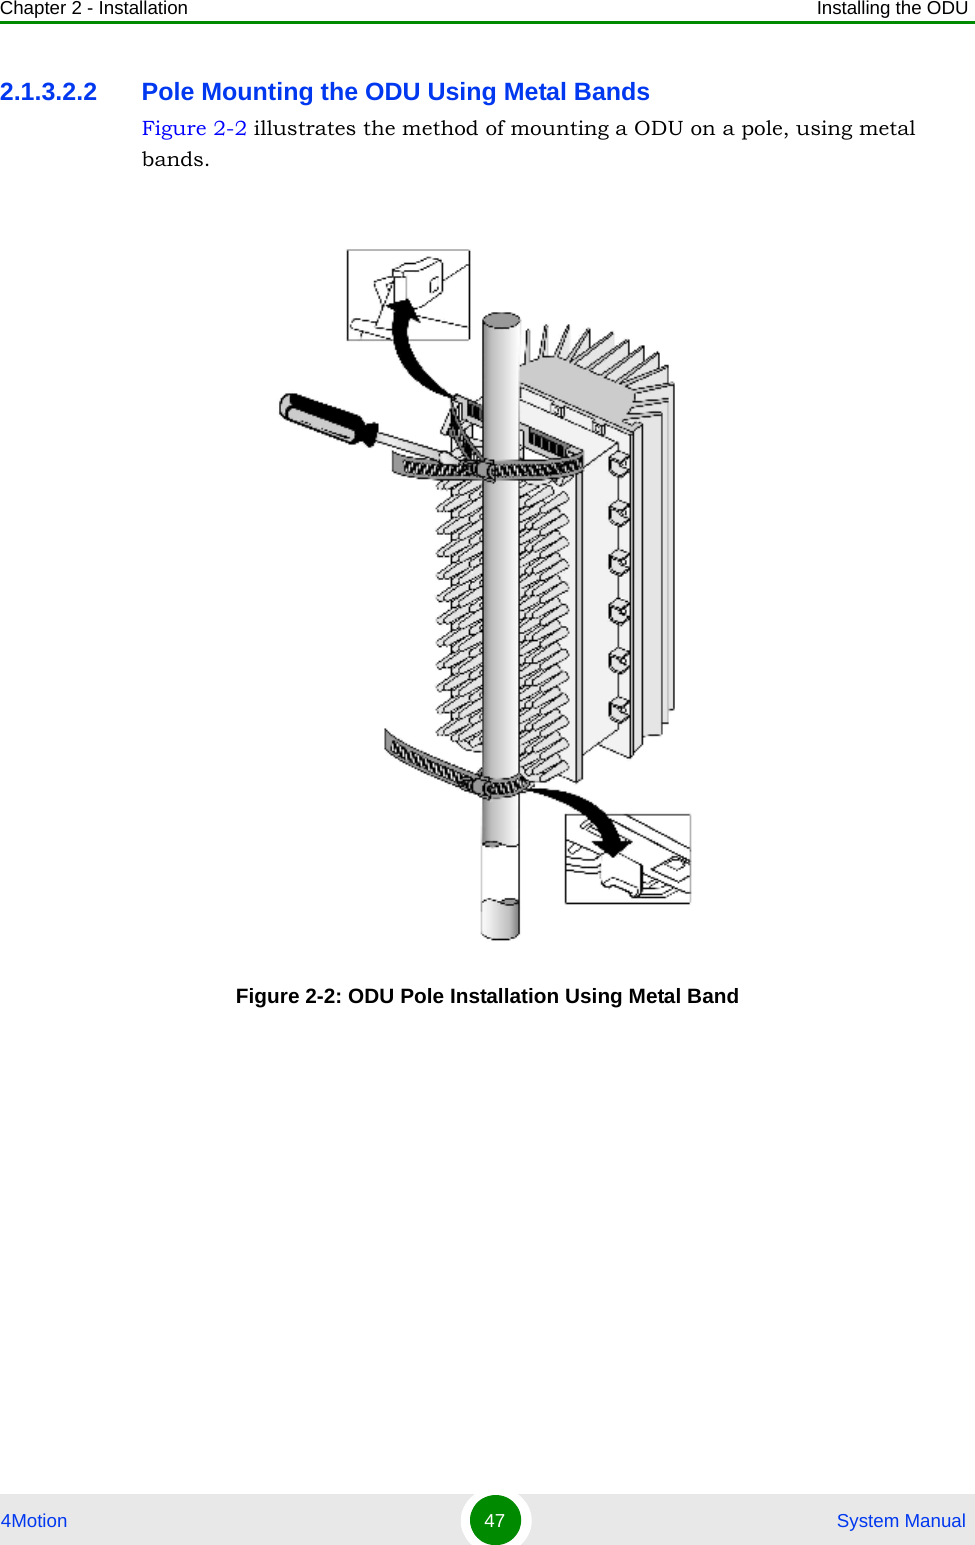 Chapter 2 - Installation Installing the ODU4Motion 47  System Manual2.1.3.2.2 Pole Mounting the ODU Using Metal BandsFigure 2-2 illustrates the method of mounting a ODU on a pole, using metal bands.Figure 2-2: ODU Pole Installation Using Metal Band